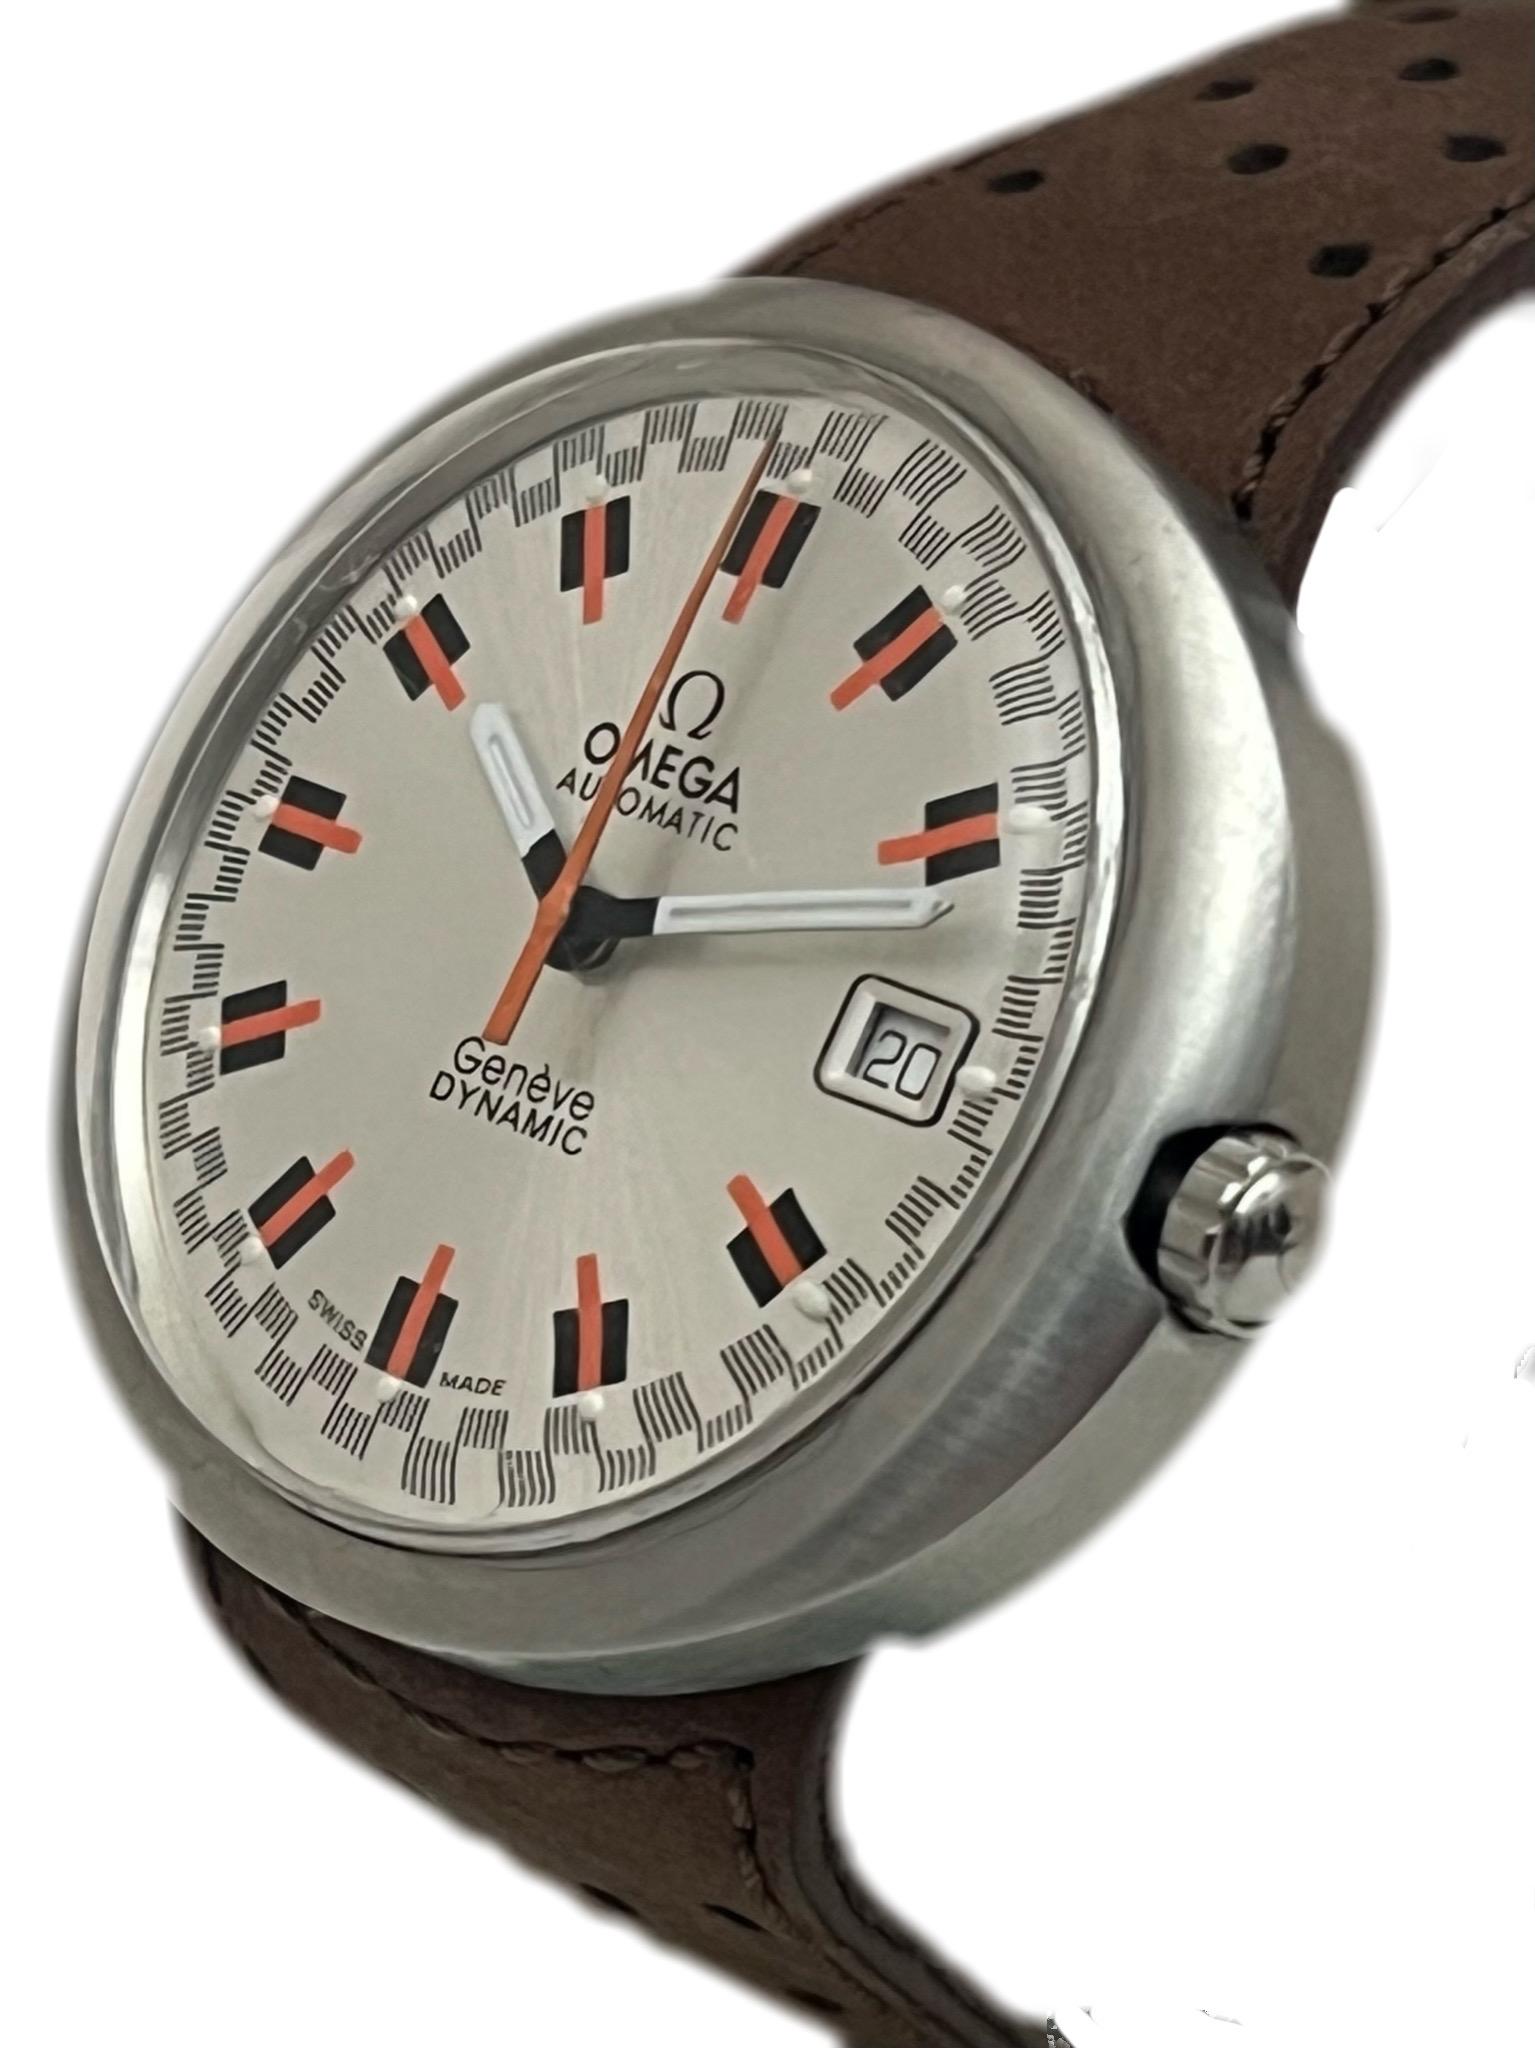 A very stylish vintage Omega Automatic Genève Dynamic wristwatch, Model Ref 166.039. Omega introduced the Ref. 166.039 Genève Dynamic in 1969 and this model is circa 1970.

The watch is made of steel oval brushed monocoque case with original Omega